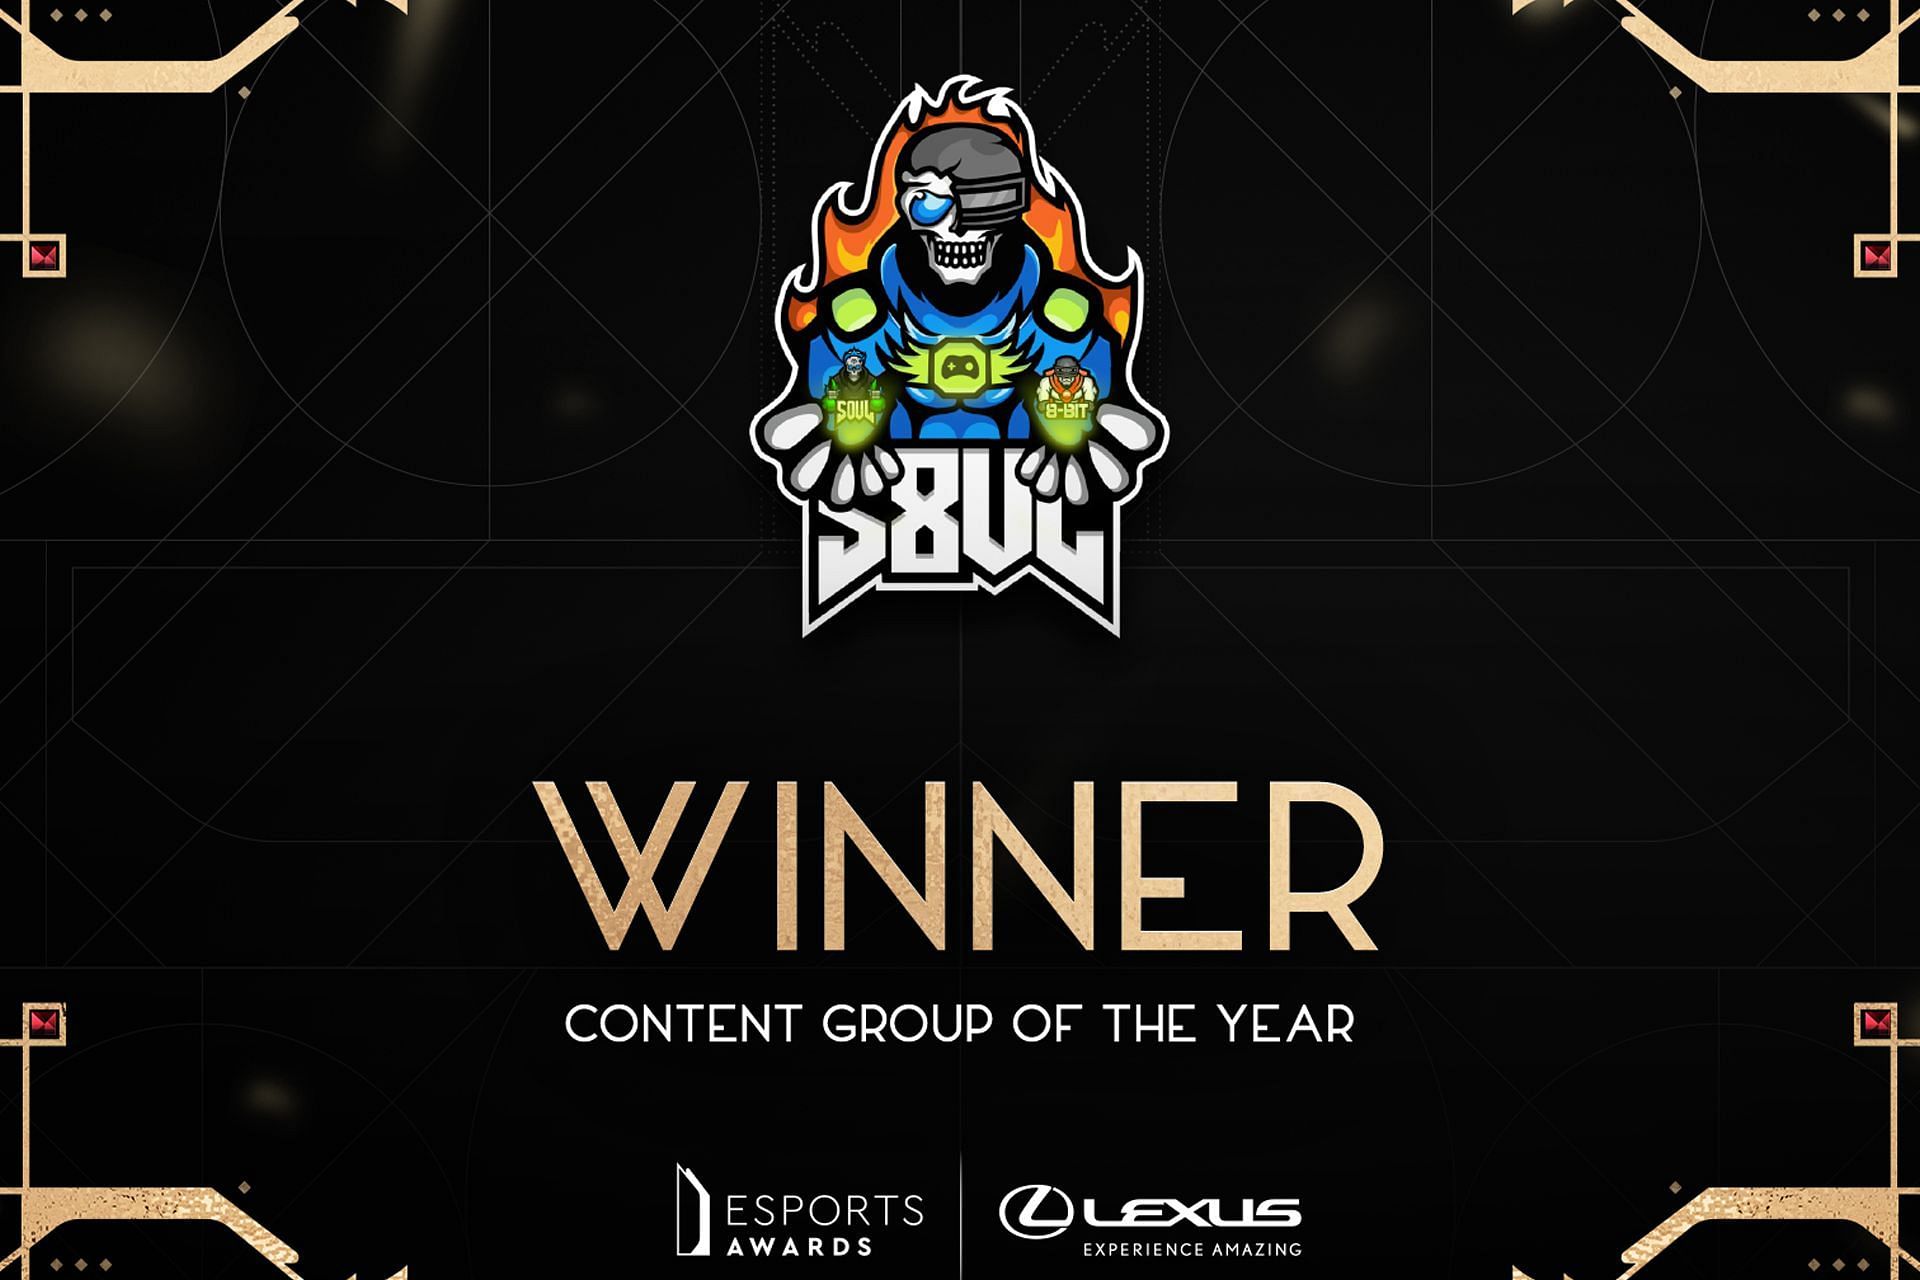 S8UL Esports was the winner in the &quot;Content Group of the Year&quot; at the Esports Awards 2022 (Image via Esports Awards)